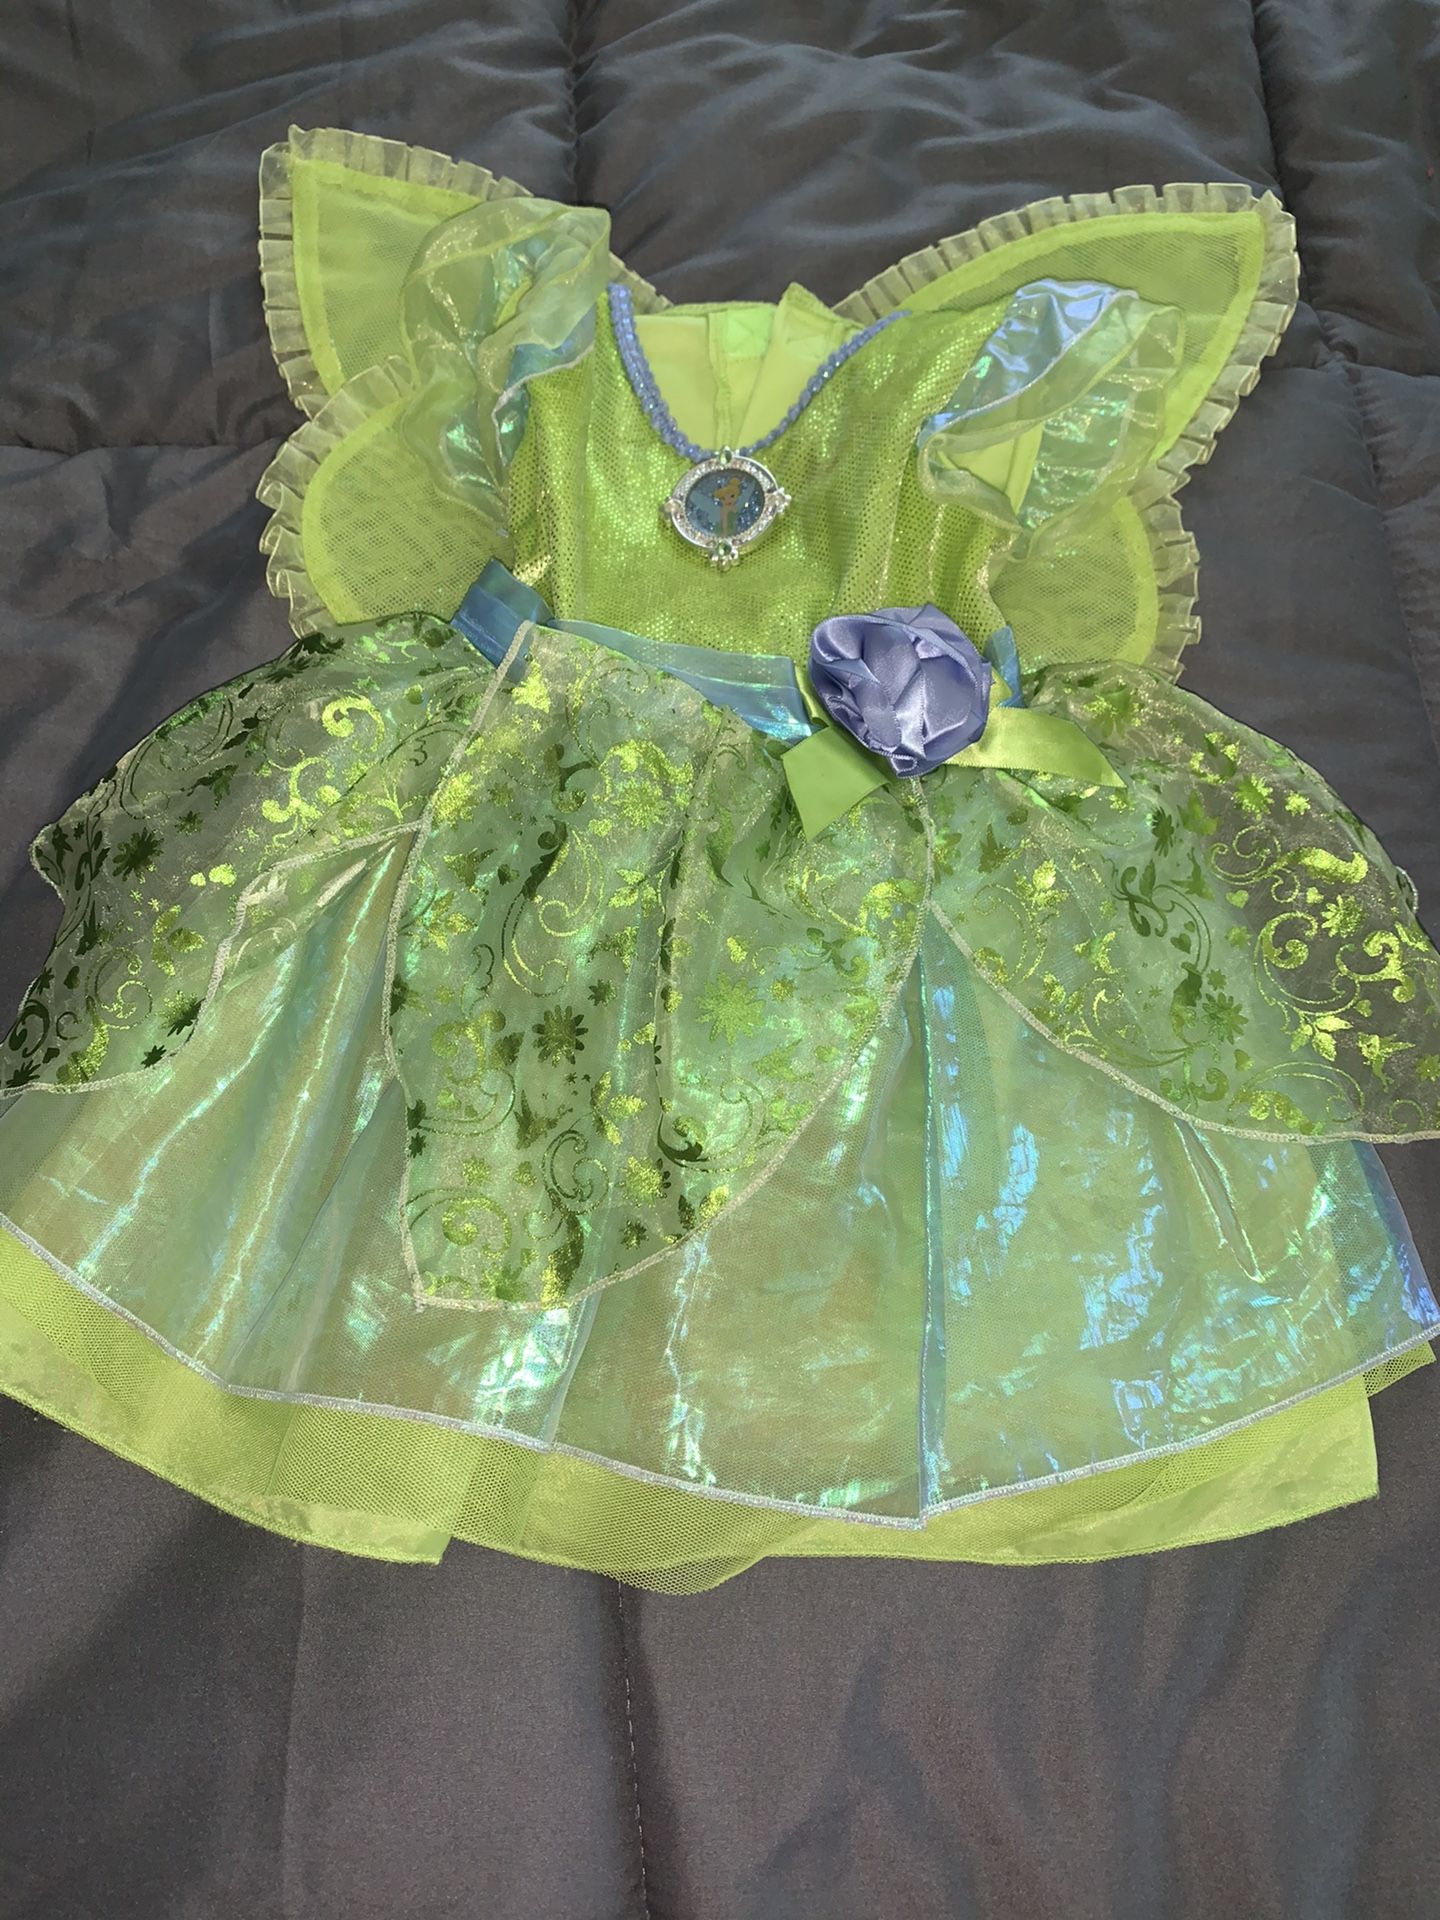 Tinkerbell baby costume 6-12 months